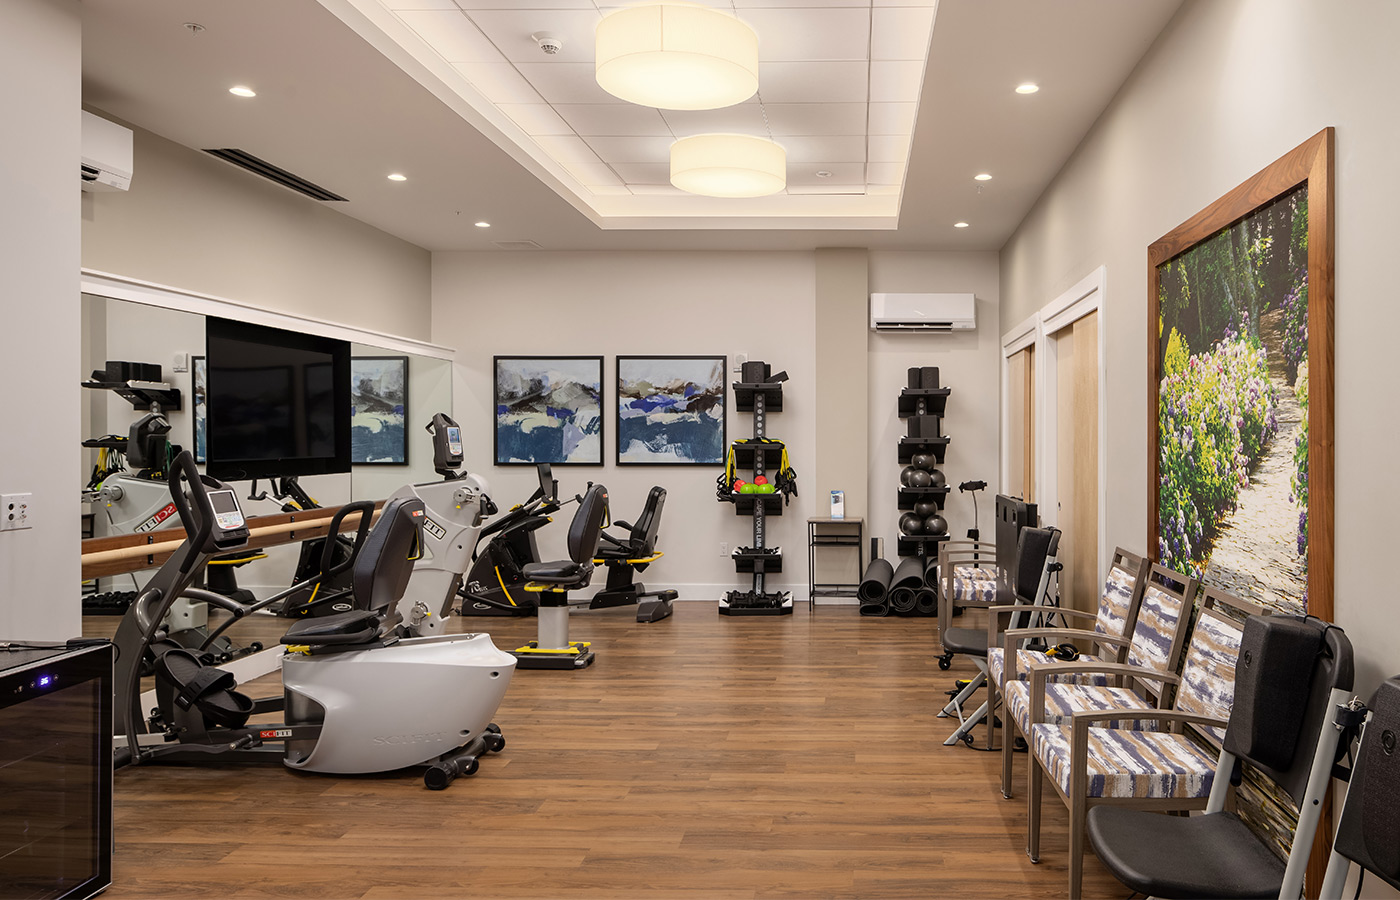 A fitness center with exercise equipment.